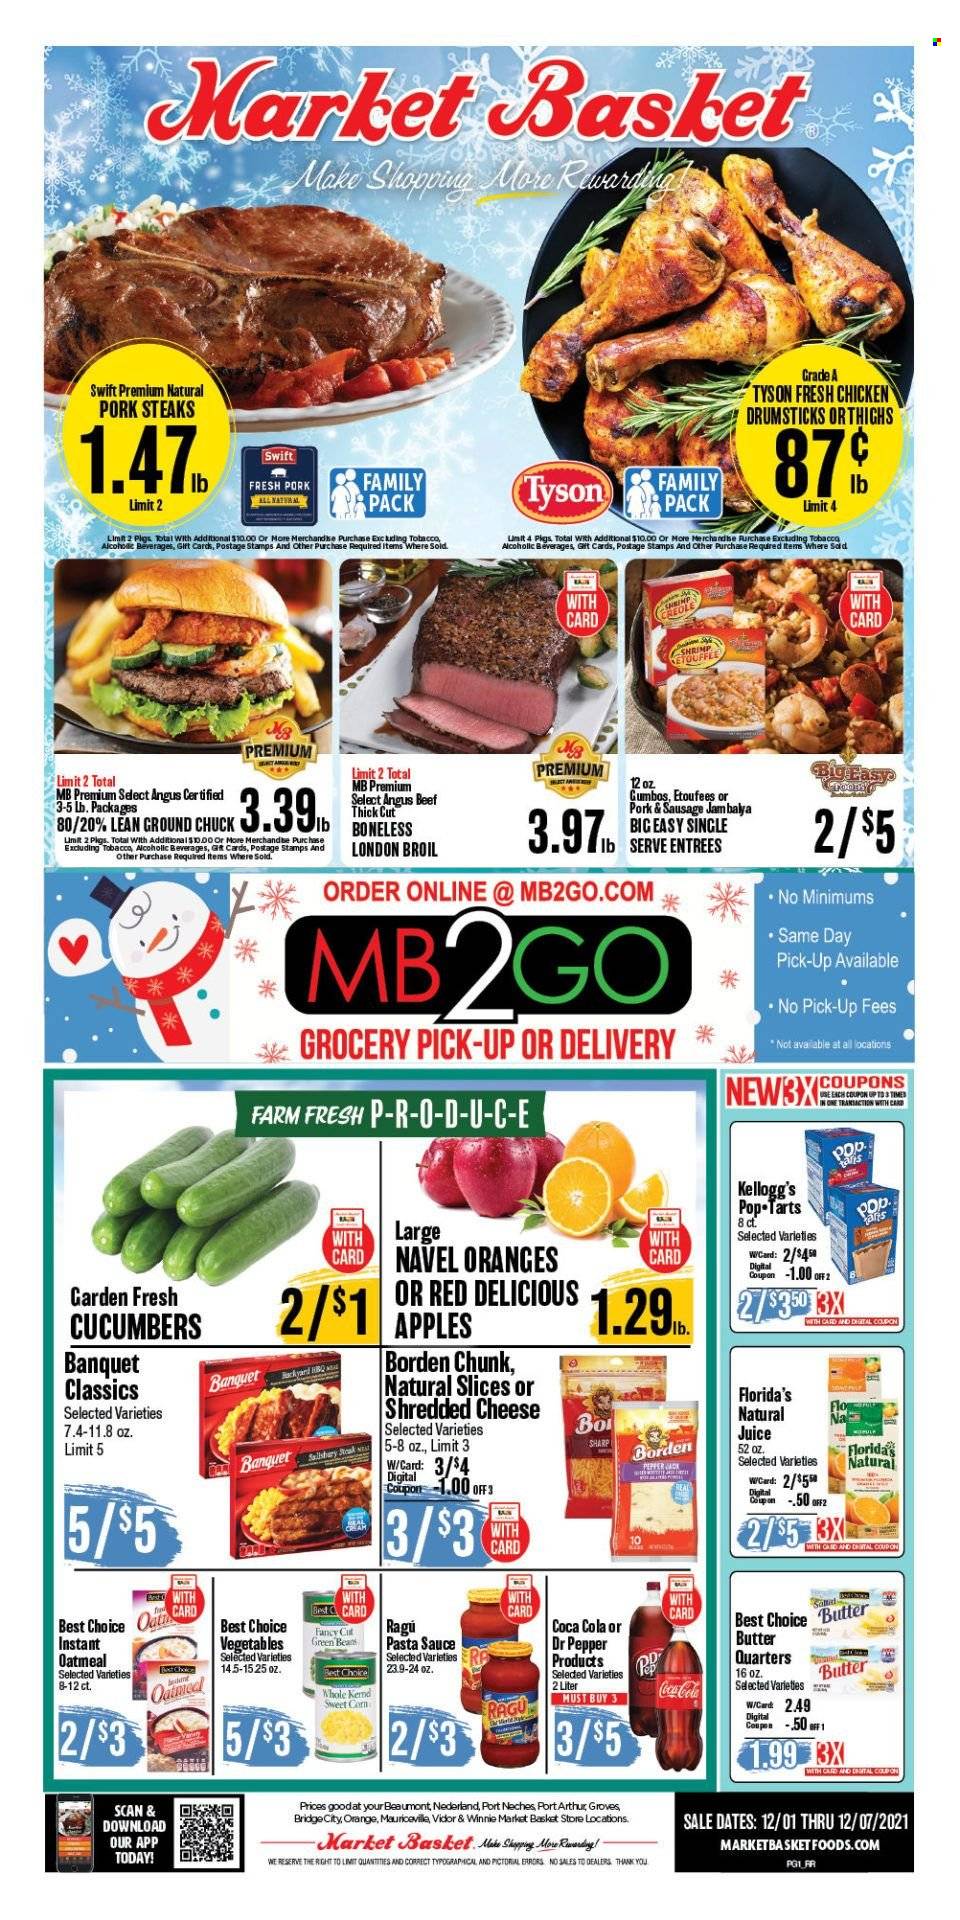 thumbnail - Market Basket Flyer - 12/01/2021 - 12/07/2021 - Sales products - corn, cucumber, sweet corn, Red Delicious apples, shrimps, pasta sauce, sauce, ragú pasta, shredded cheese, butter, Kellogg's, Pop-Tarts, Florida's Natural, oatmeal, oats, ragu, Coca-Cola, juice, Dr. Pepper, chicken drumsticks, beef meat, ground chuck, steak, pork chops, pork meat, navel oranges. Page 1.